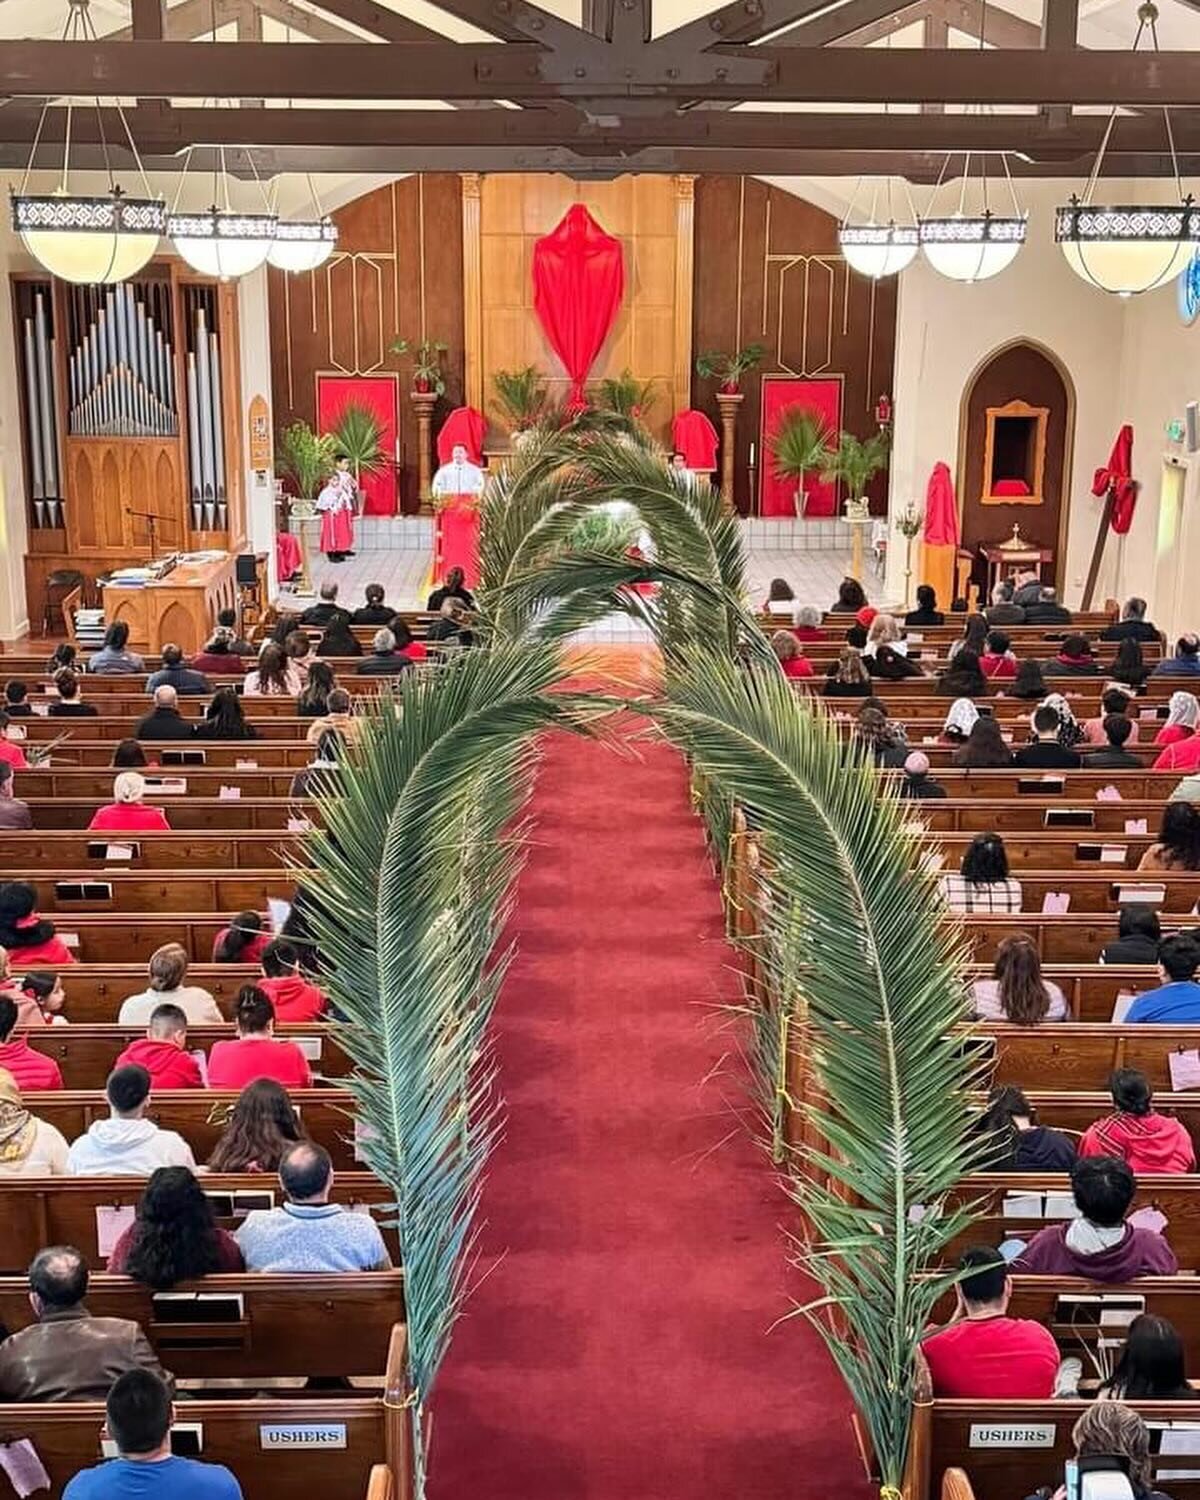 Our beautiful church on Palm Sunday. As we welcome Jesus with palm branches, let&rsquo;s embrace the spirit of humility and reflection this Holy Week. May all of our hearts be open to the lesson of love, sacrifice, and redemption as we journey toward